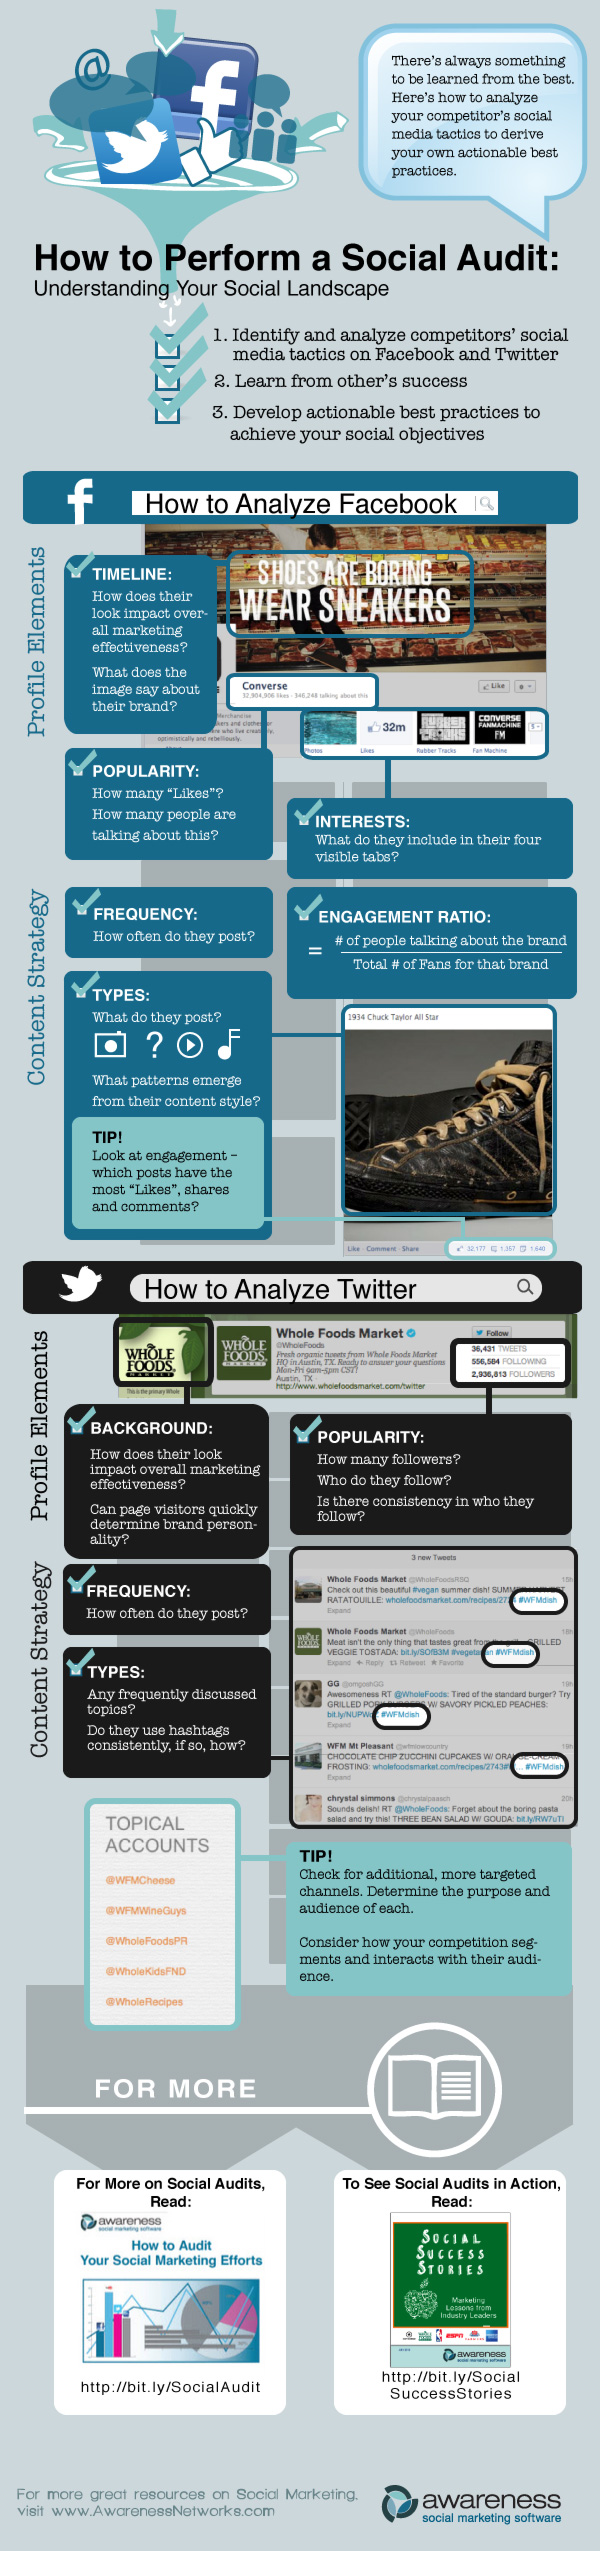 social audits infographic final resized 600